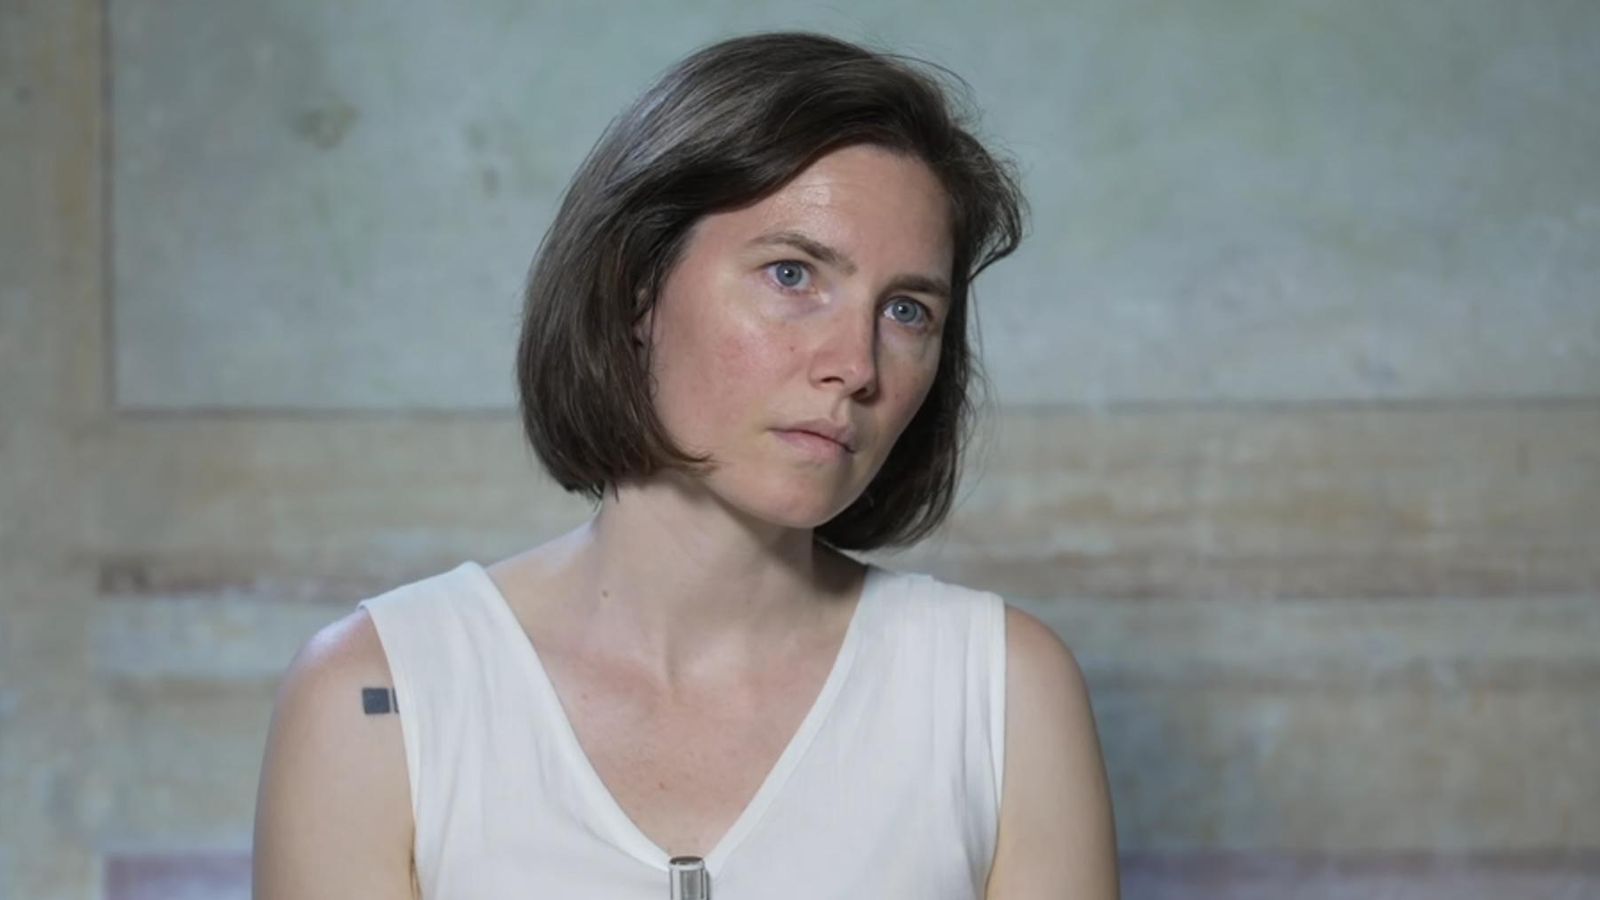 Amanda Knox insists she is a 'victim' and did not slander or kill anyone after her reconviction